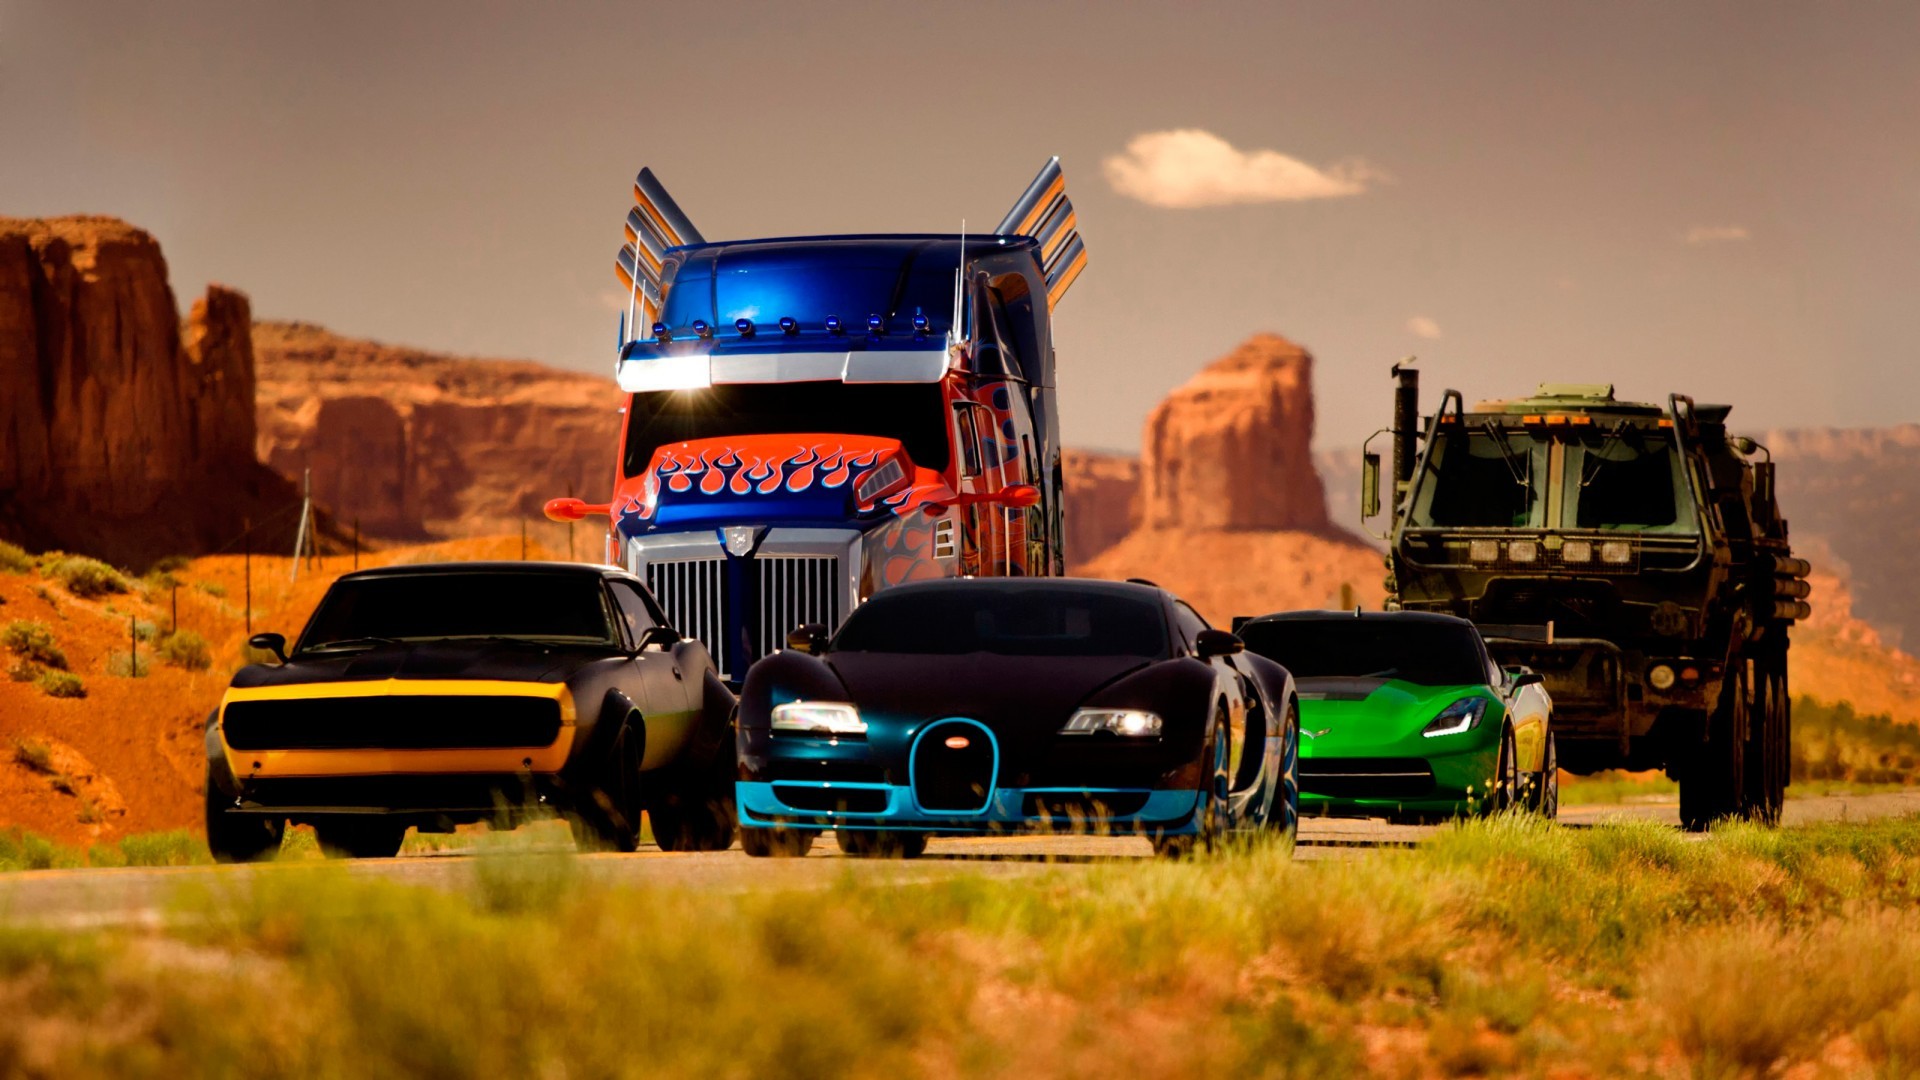 Car Transformers Age Of Extinction Movies Vehicle 1920x1080